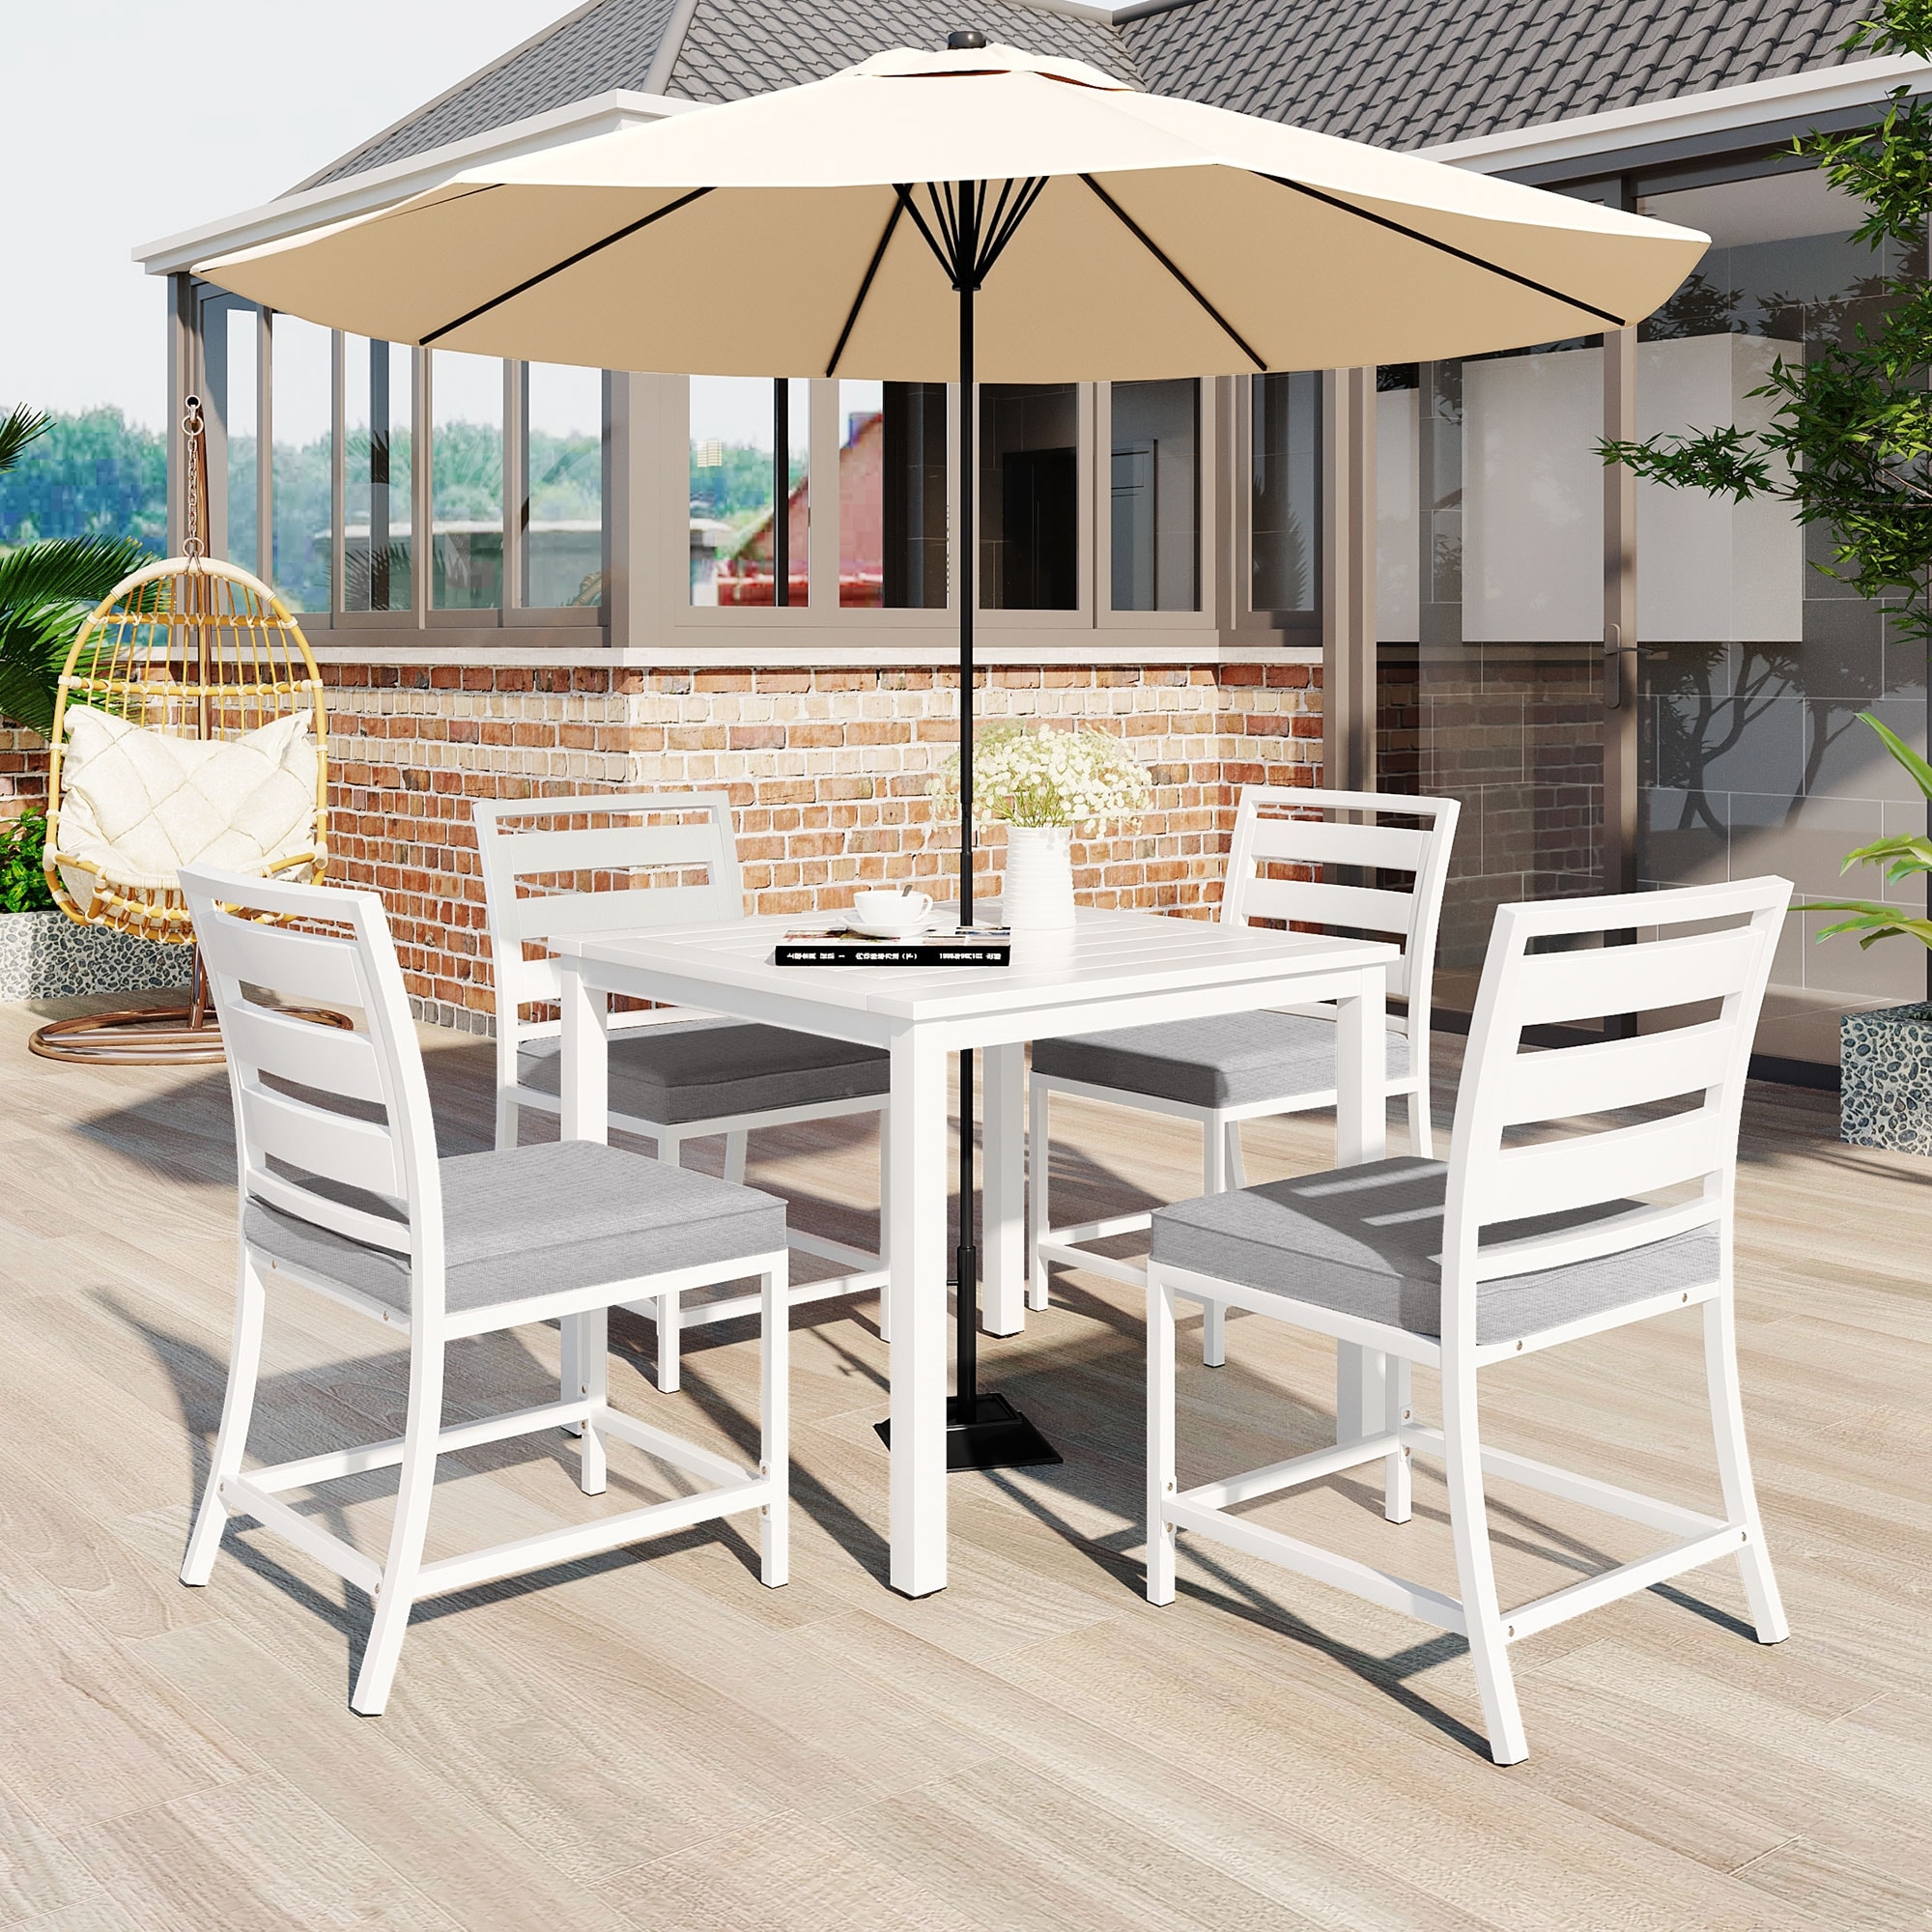 5 Pcs Patio Furniture Sets  All-weather Outdoor Dining Table Set With 4 Soft Cushions Chairs For Courtyards  Balconies  Lawns